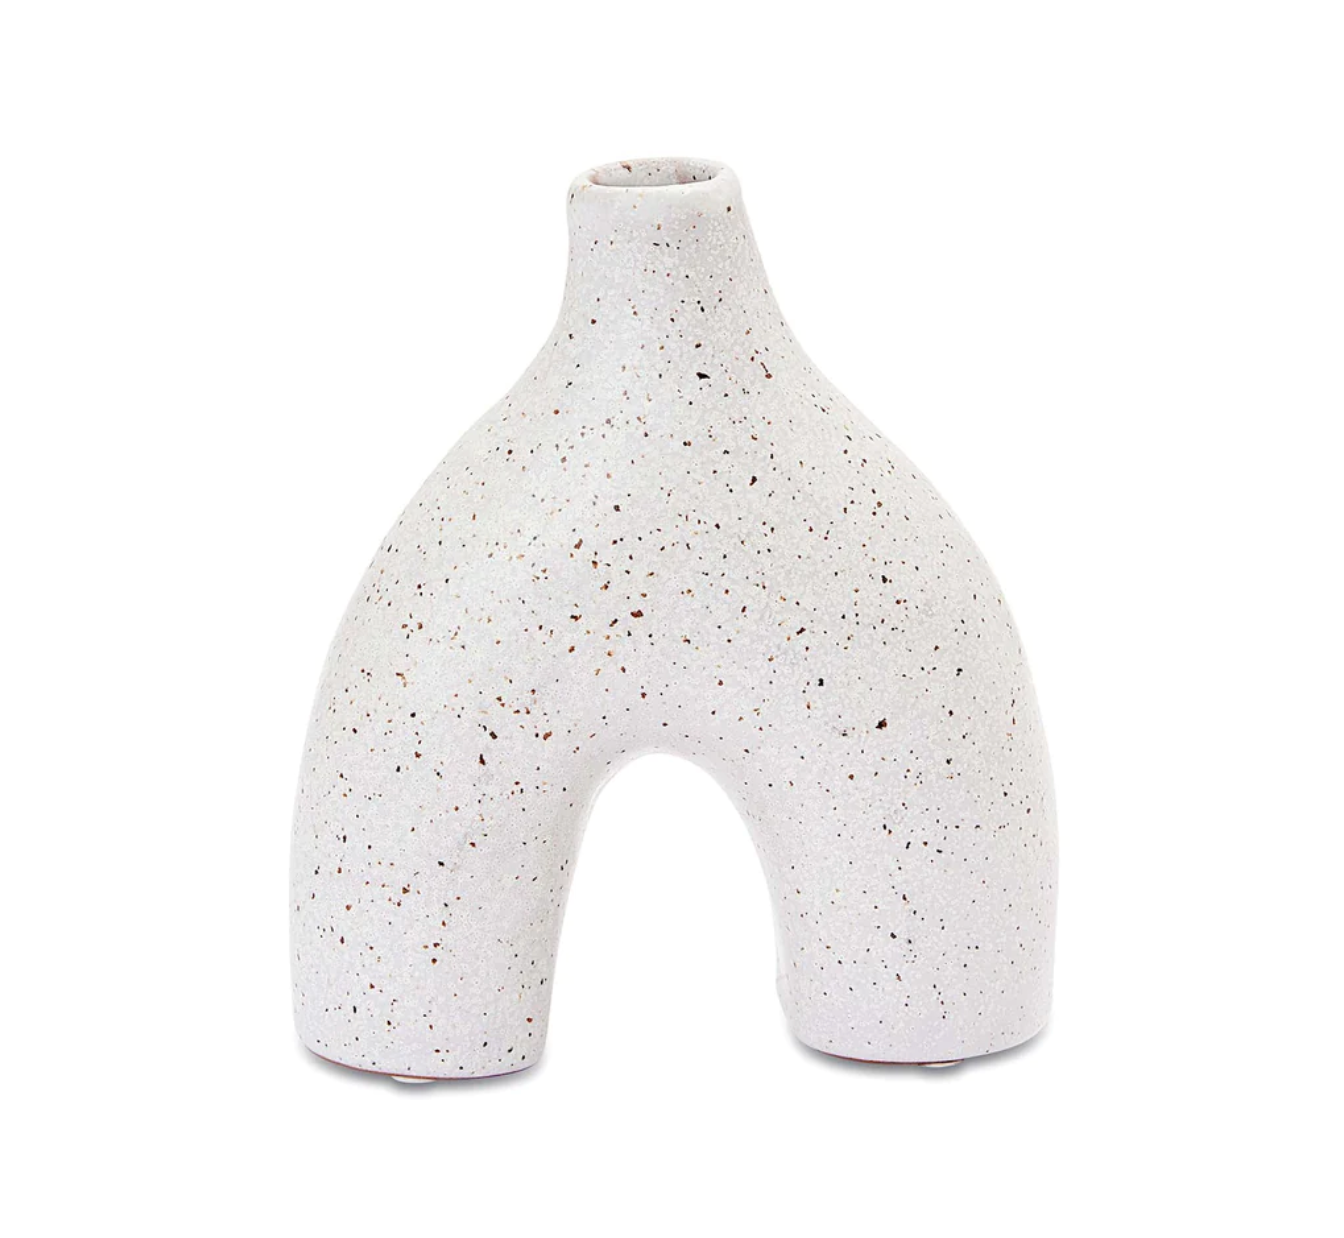 Arch Speckle Vase